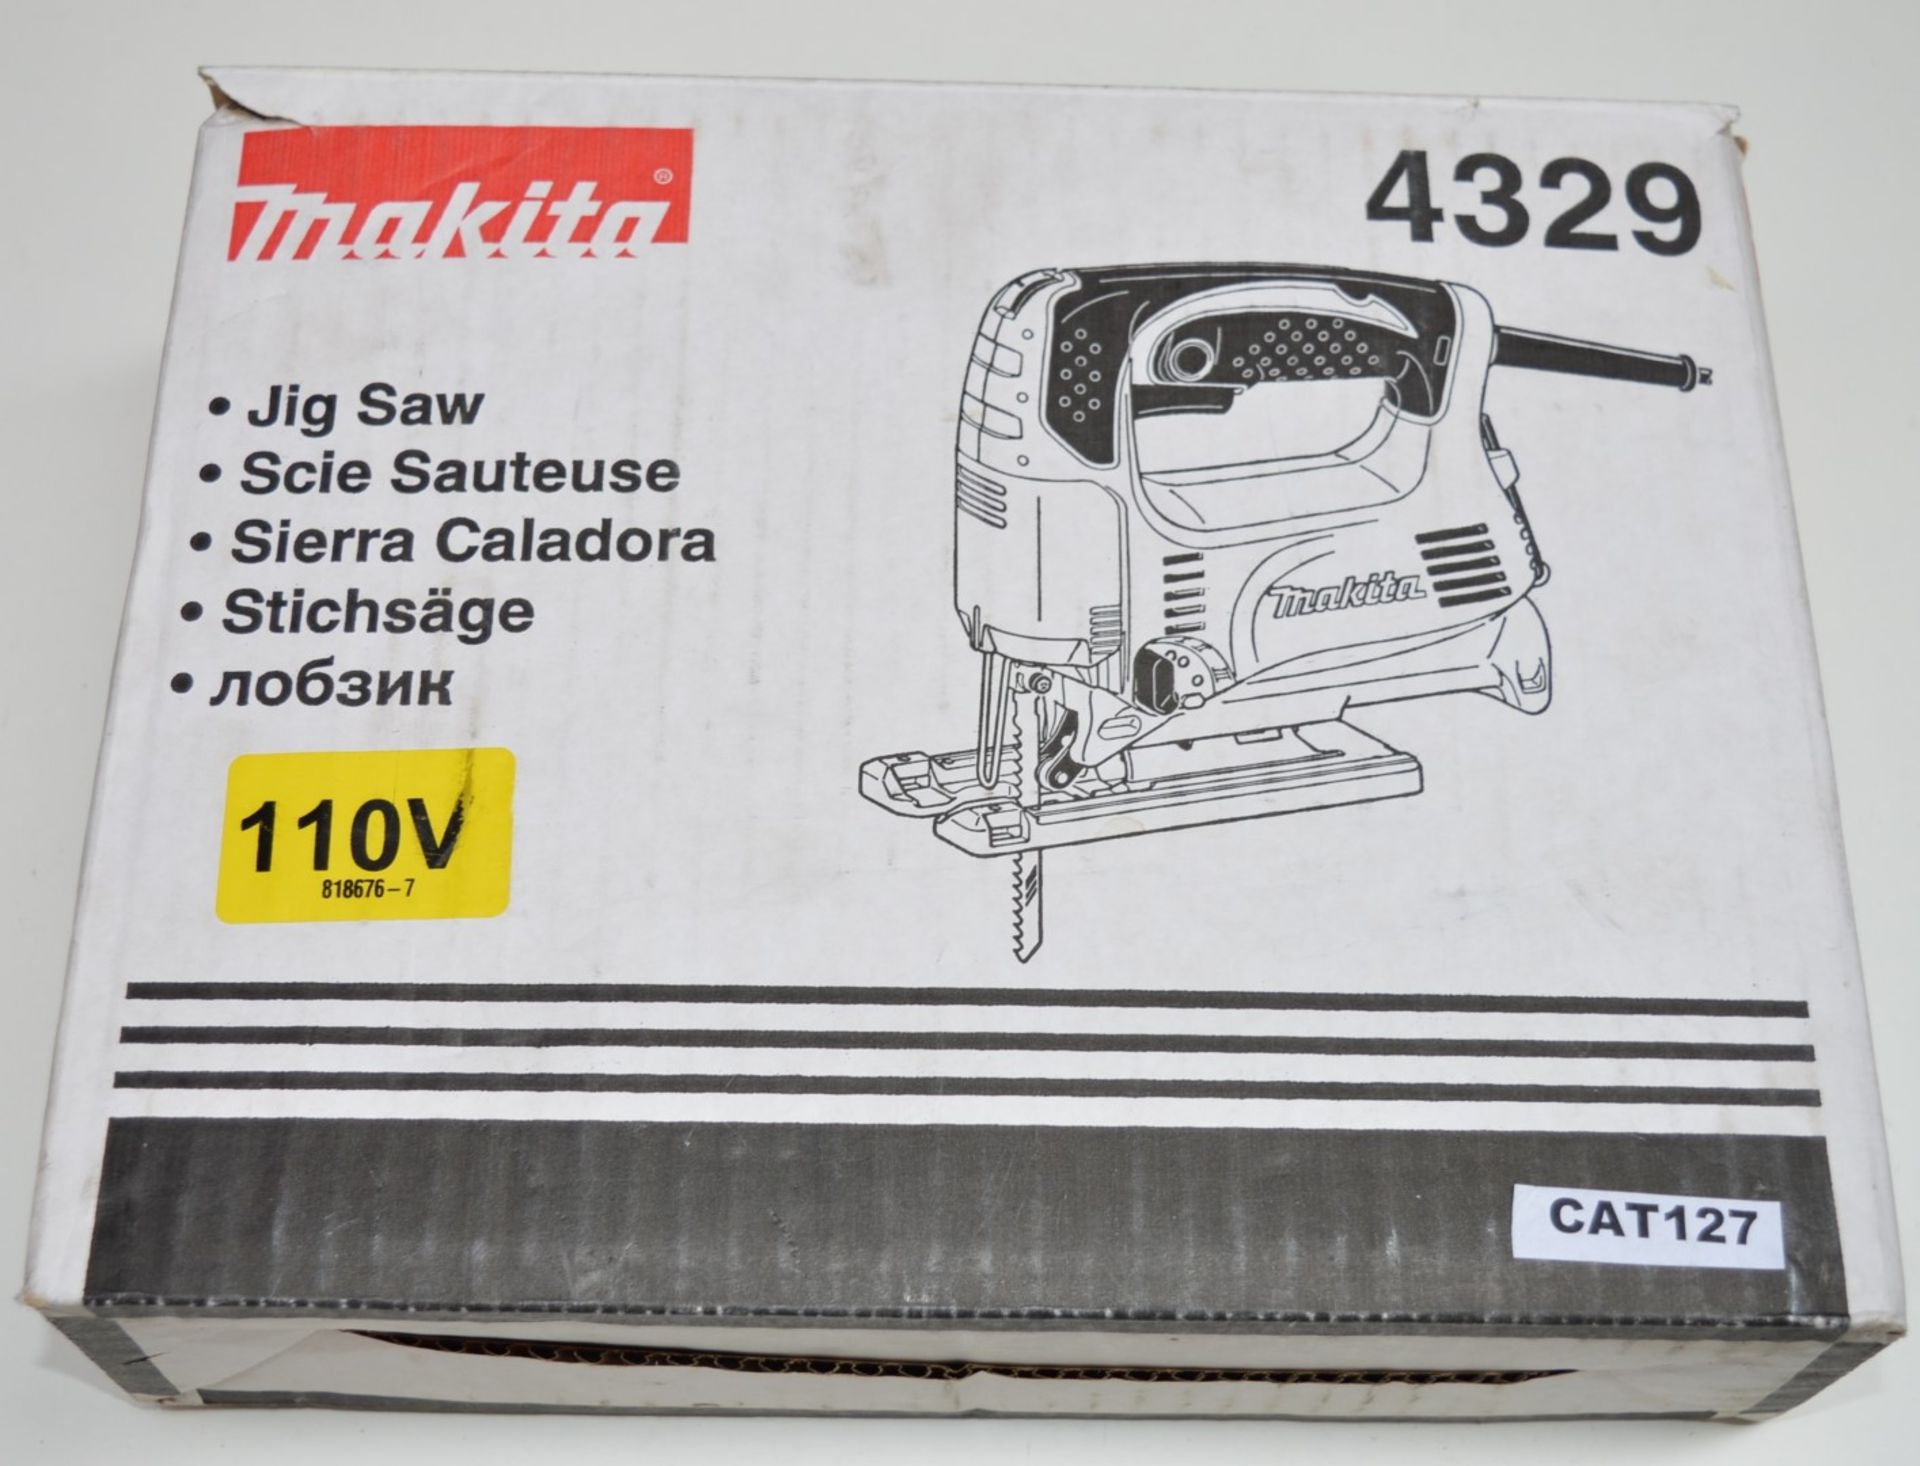 1 x Makita 4329 Professional Variable-Speed Corded Jigsaw 1100V - Boxed With Instructions - Hardly - Image 2 of 3